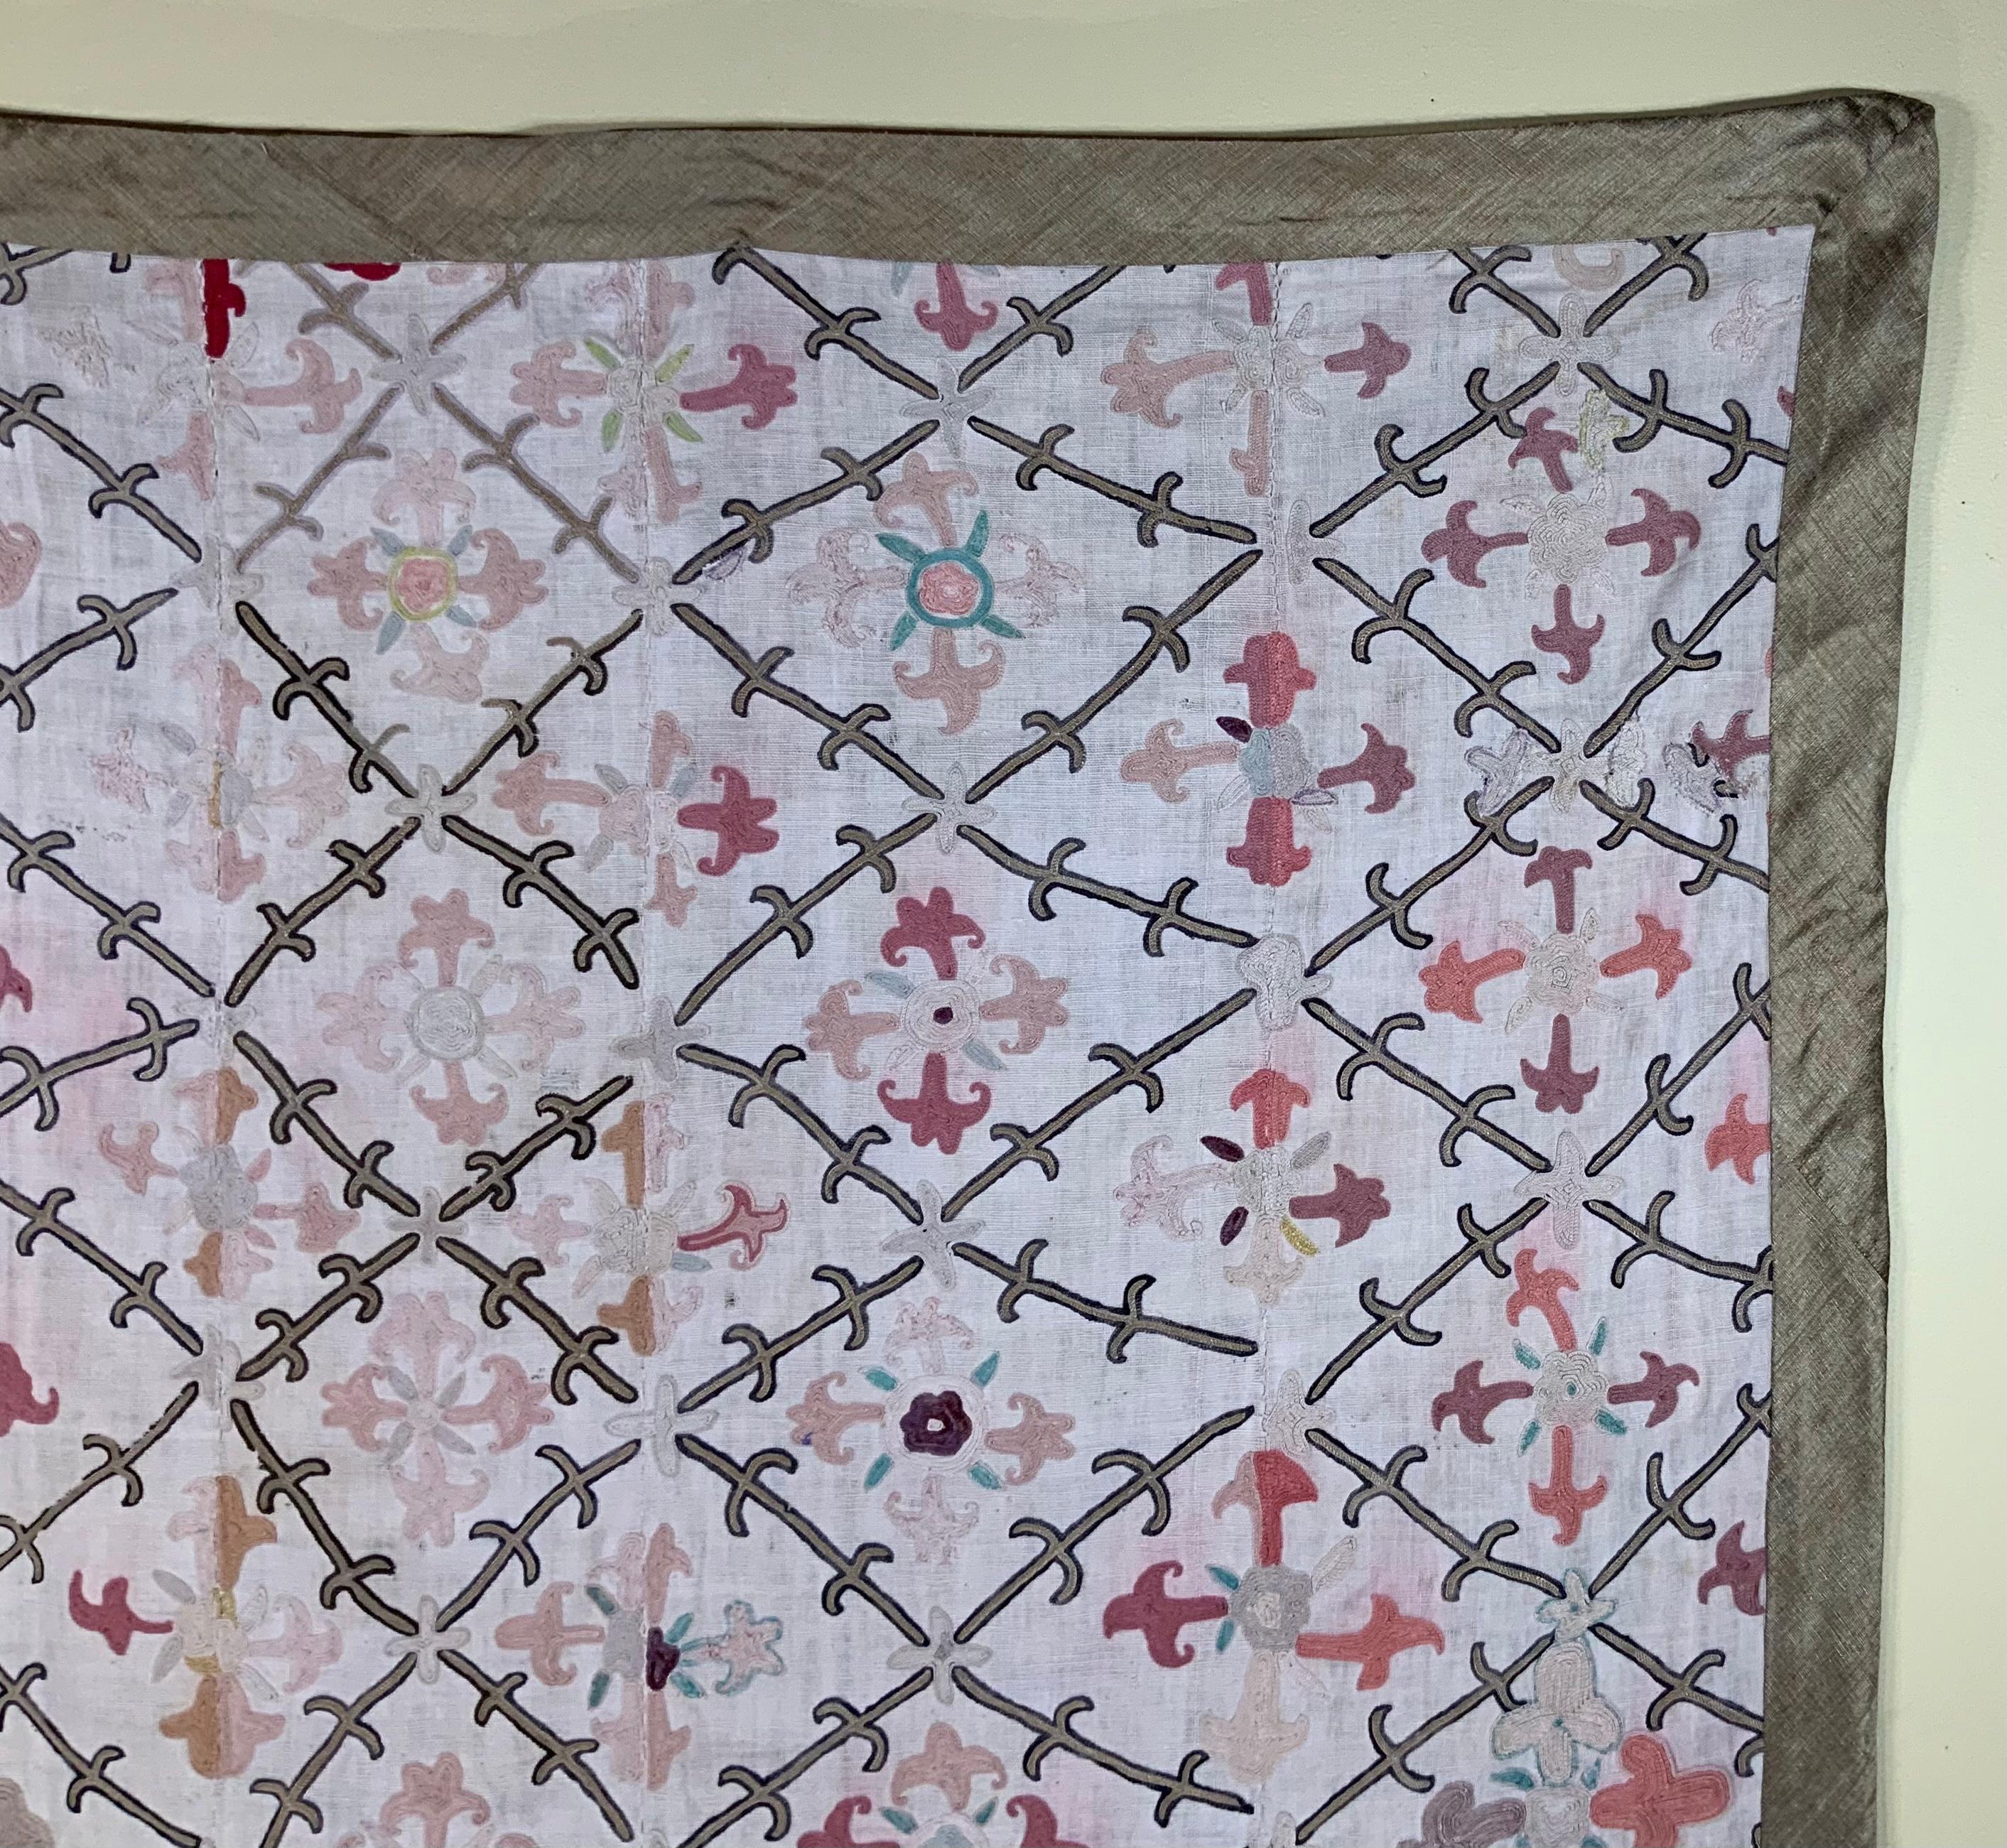 Antique Suzani textile made of hand embroidery intricate scrolling of eight large flowers motifs on a handwoven cotton background. Professionally cleaned and backed with fine textile.
Could use as wall hanging or on top of table or